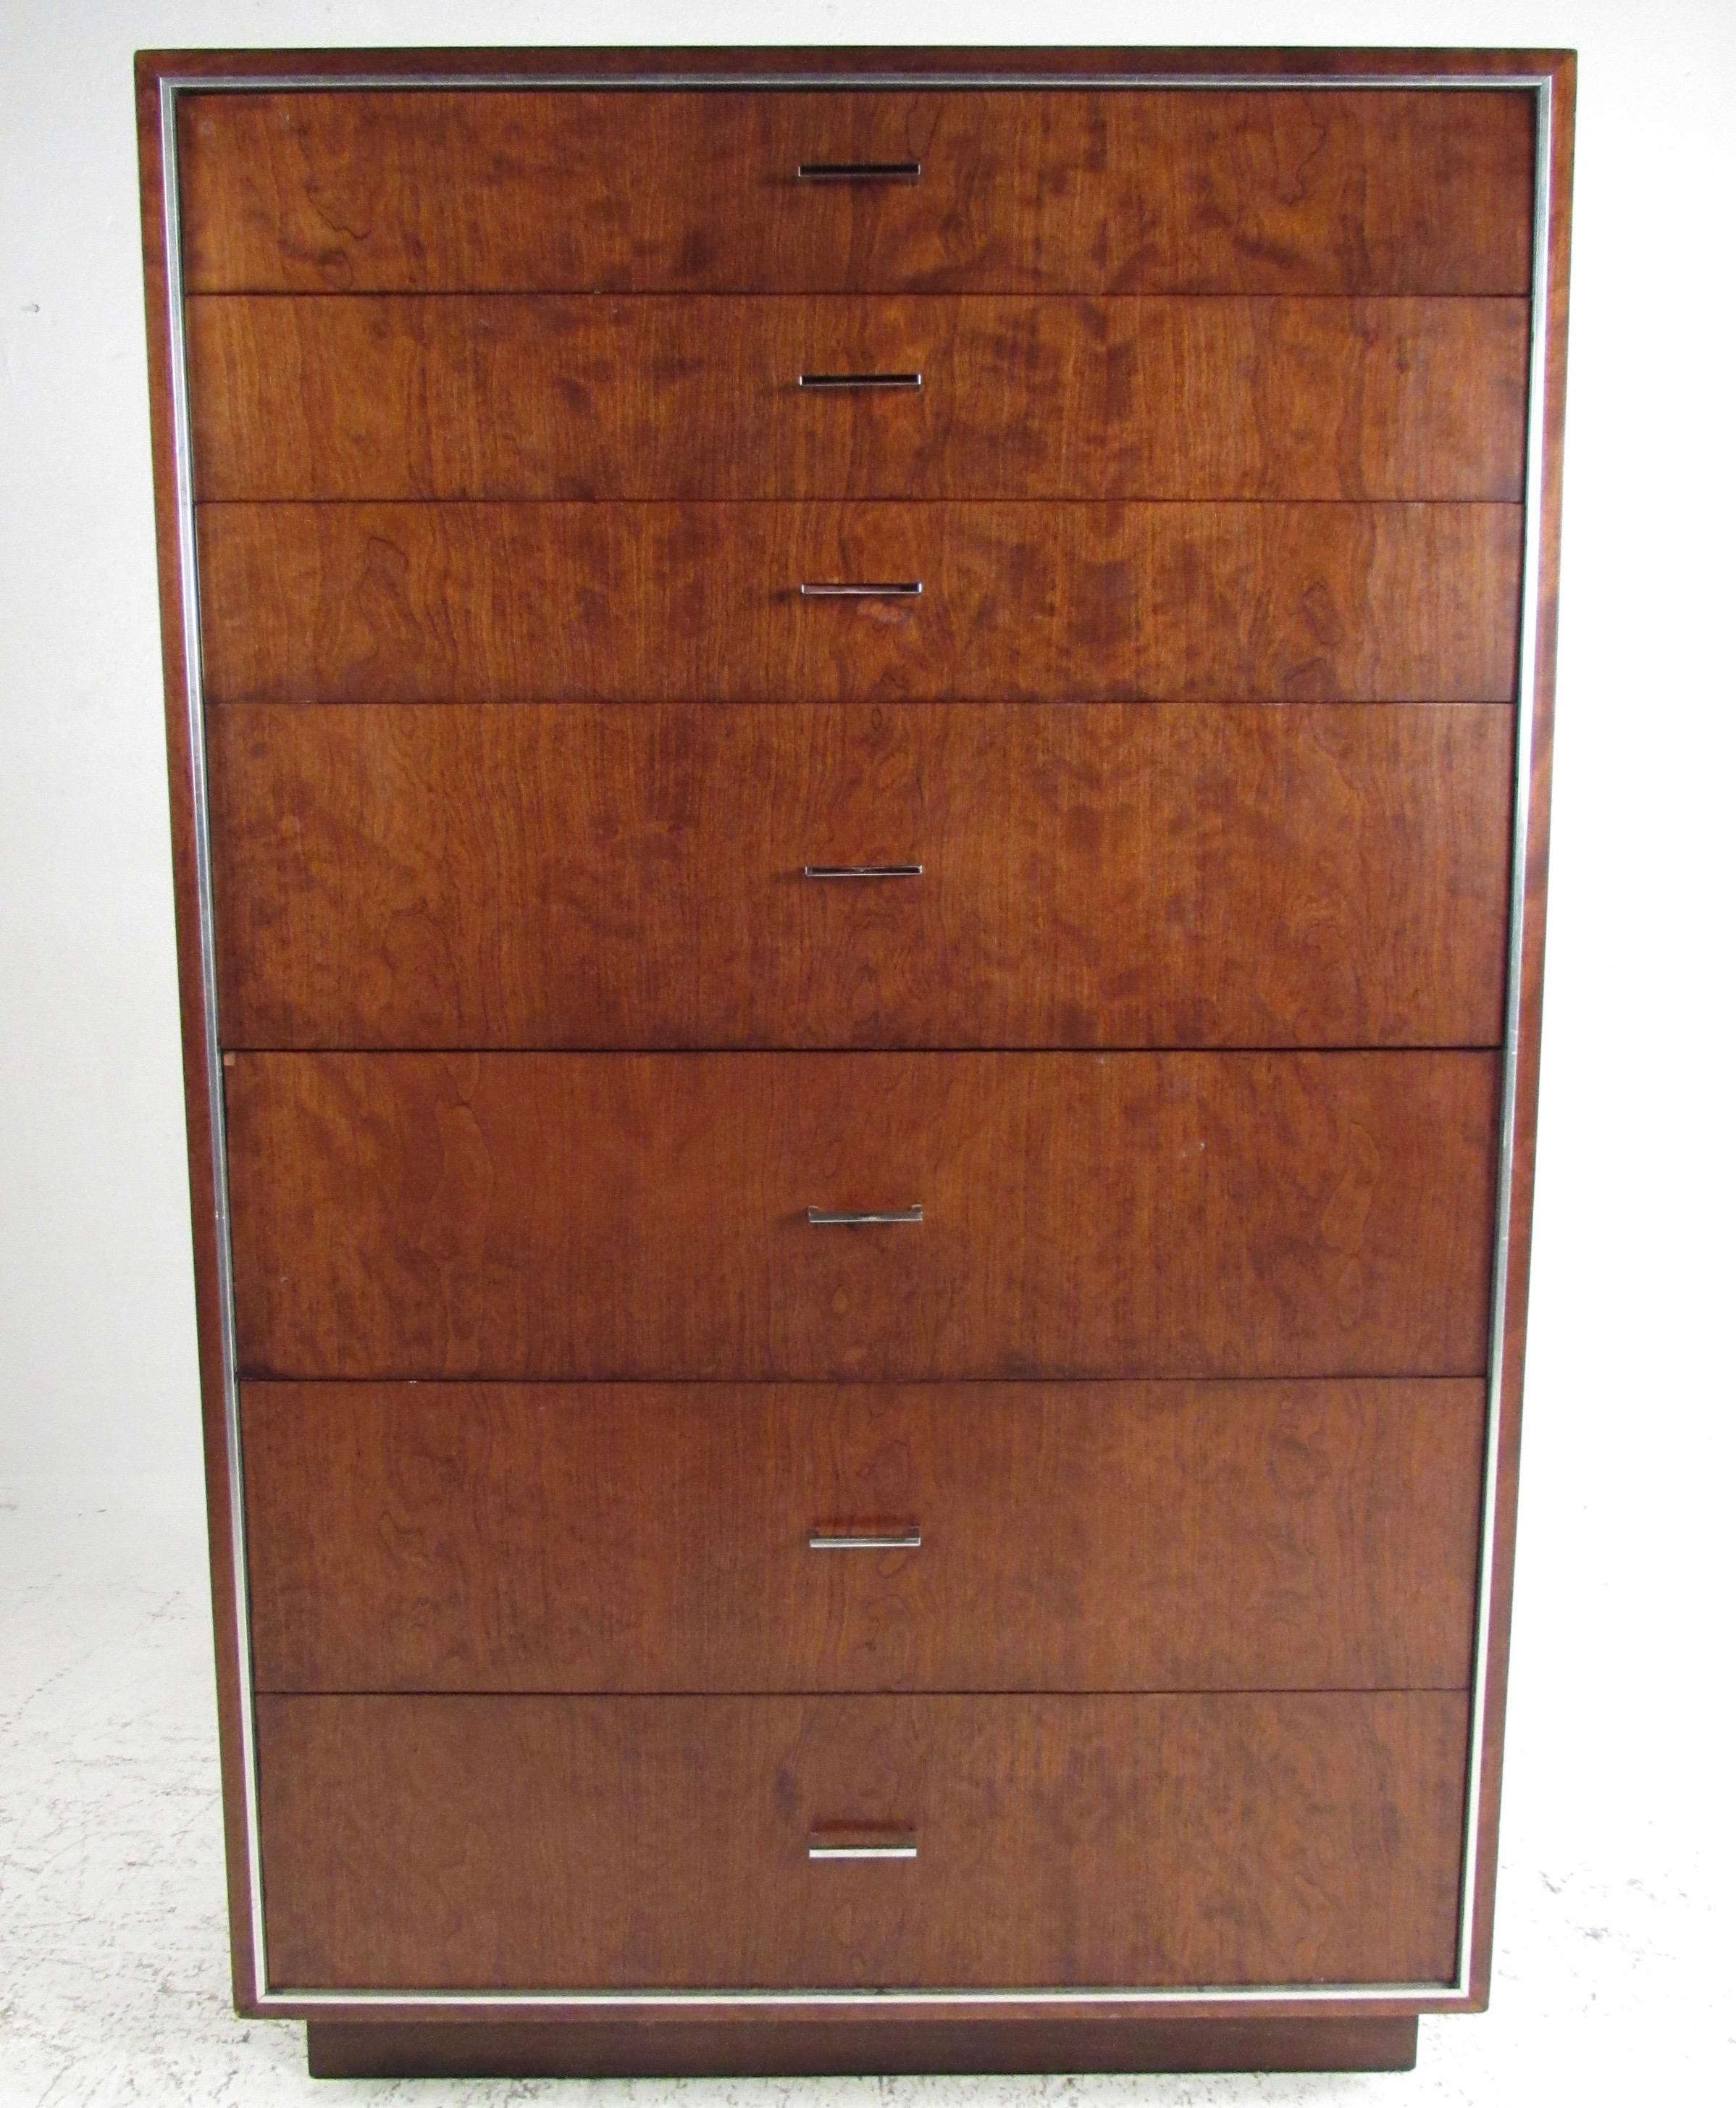 This tall midcentury dresser by John Stuart Inc. features warm walnut tones accented by aluminium trim and chrome drawer pulls. This substantial mid-century highboy makes an impressive dresser in any bedroom setting, offering seven graduated drawers